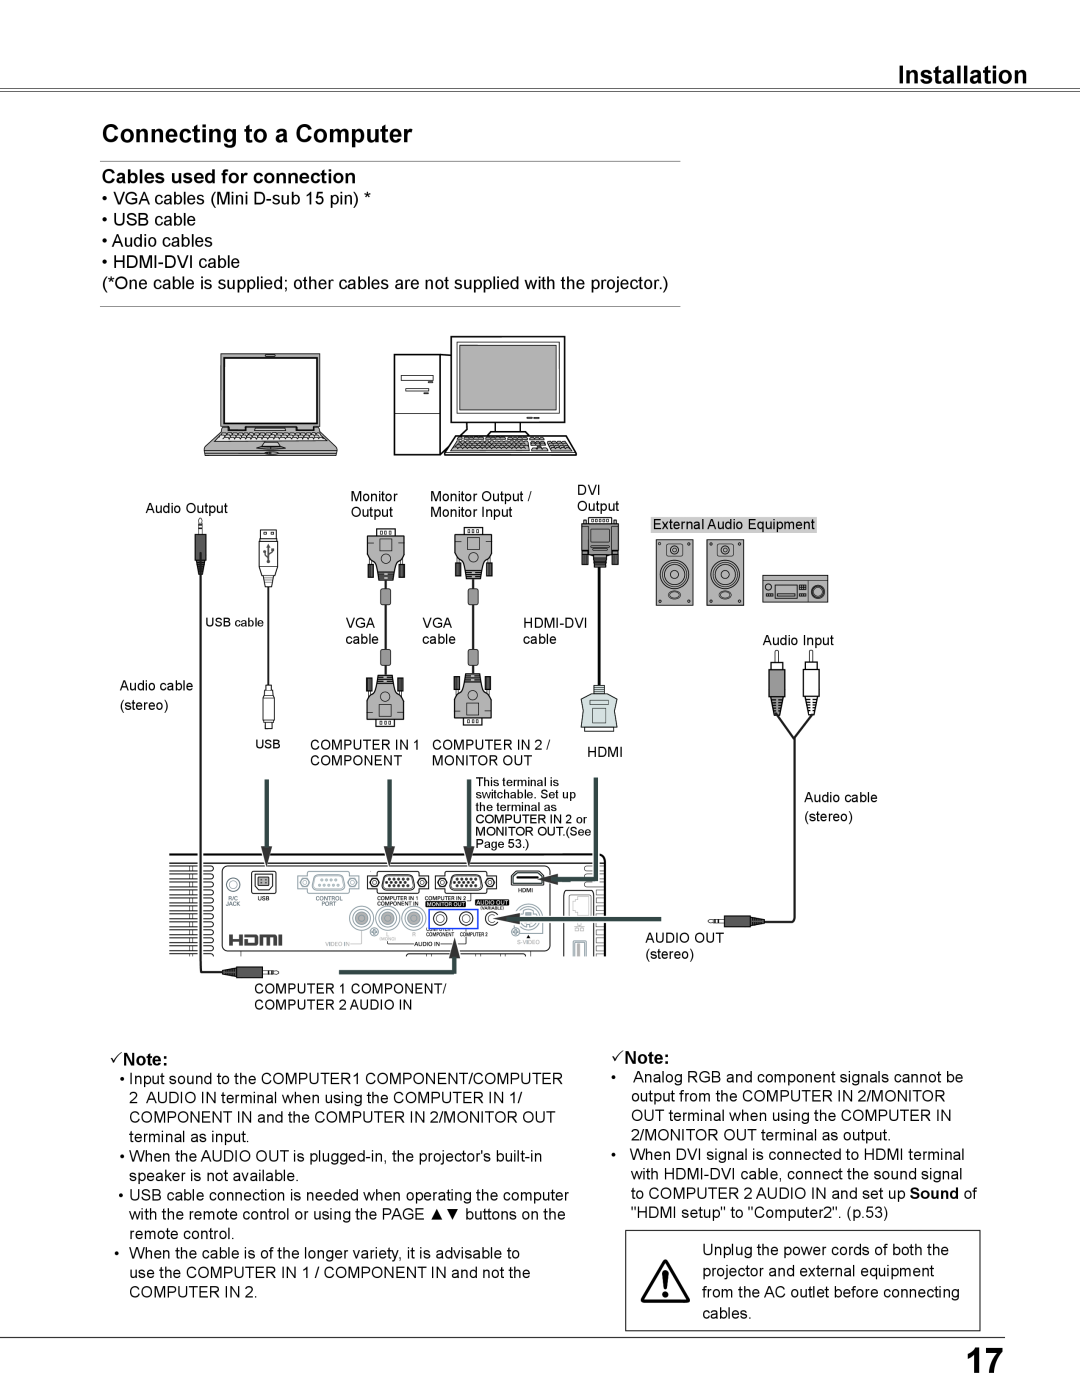 Sanyo WXU700A owner manual Installation Connecting to a Computer, Cables used for connection, Note 